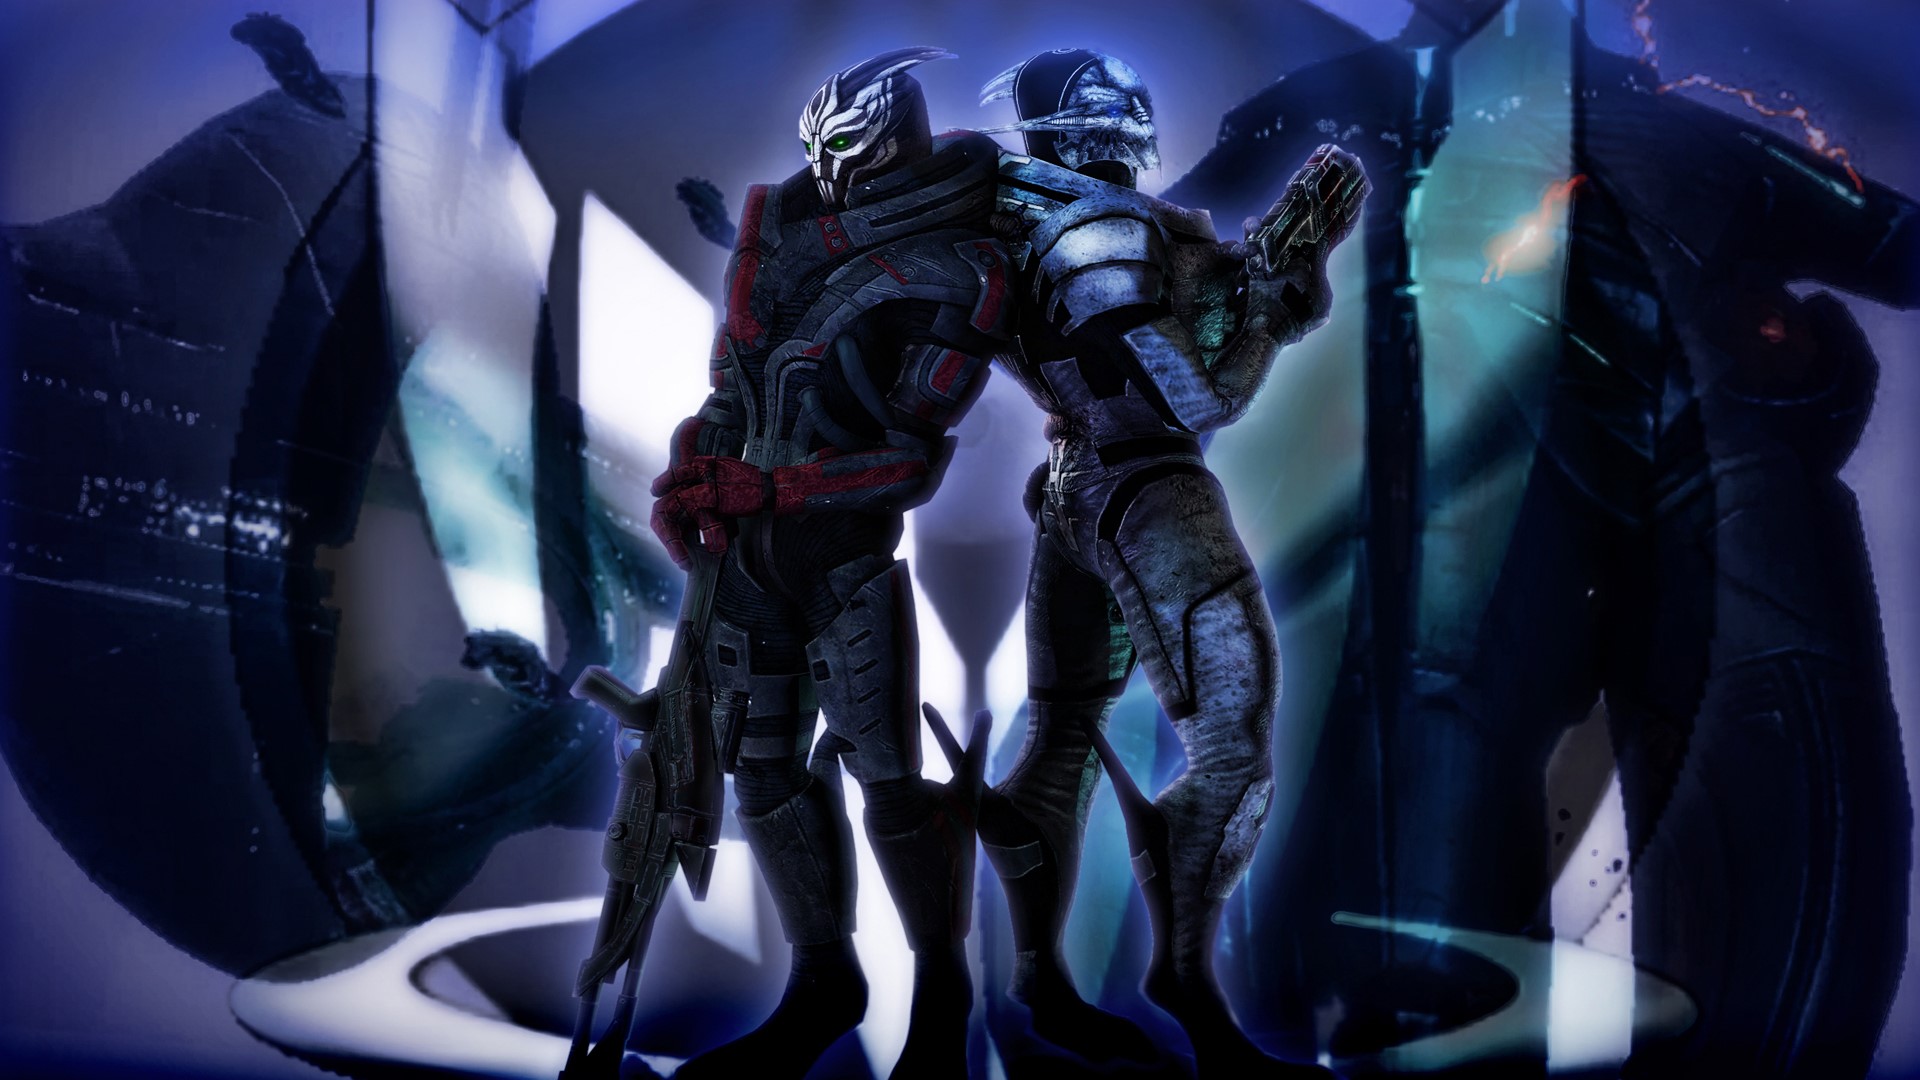 Mass Effect Dual Monitor Wallpapers